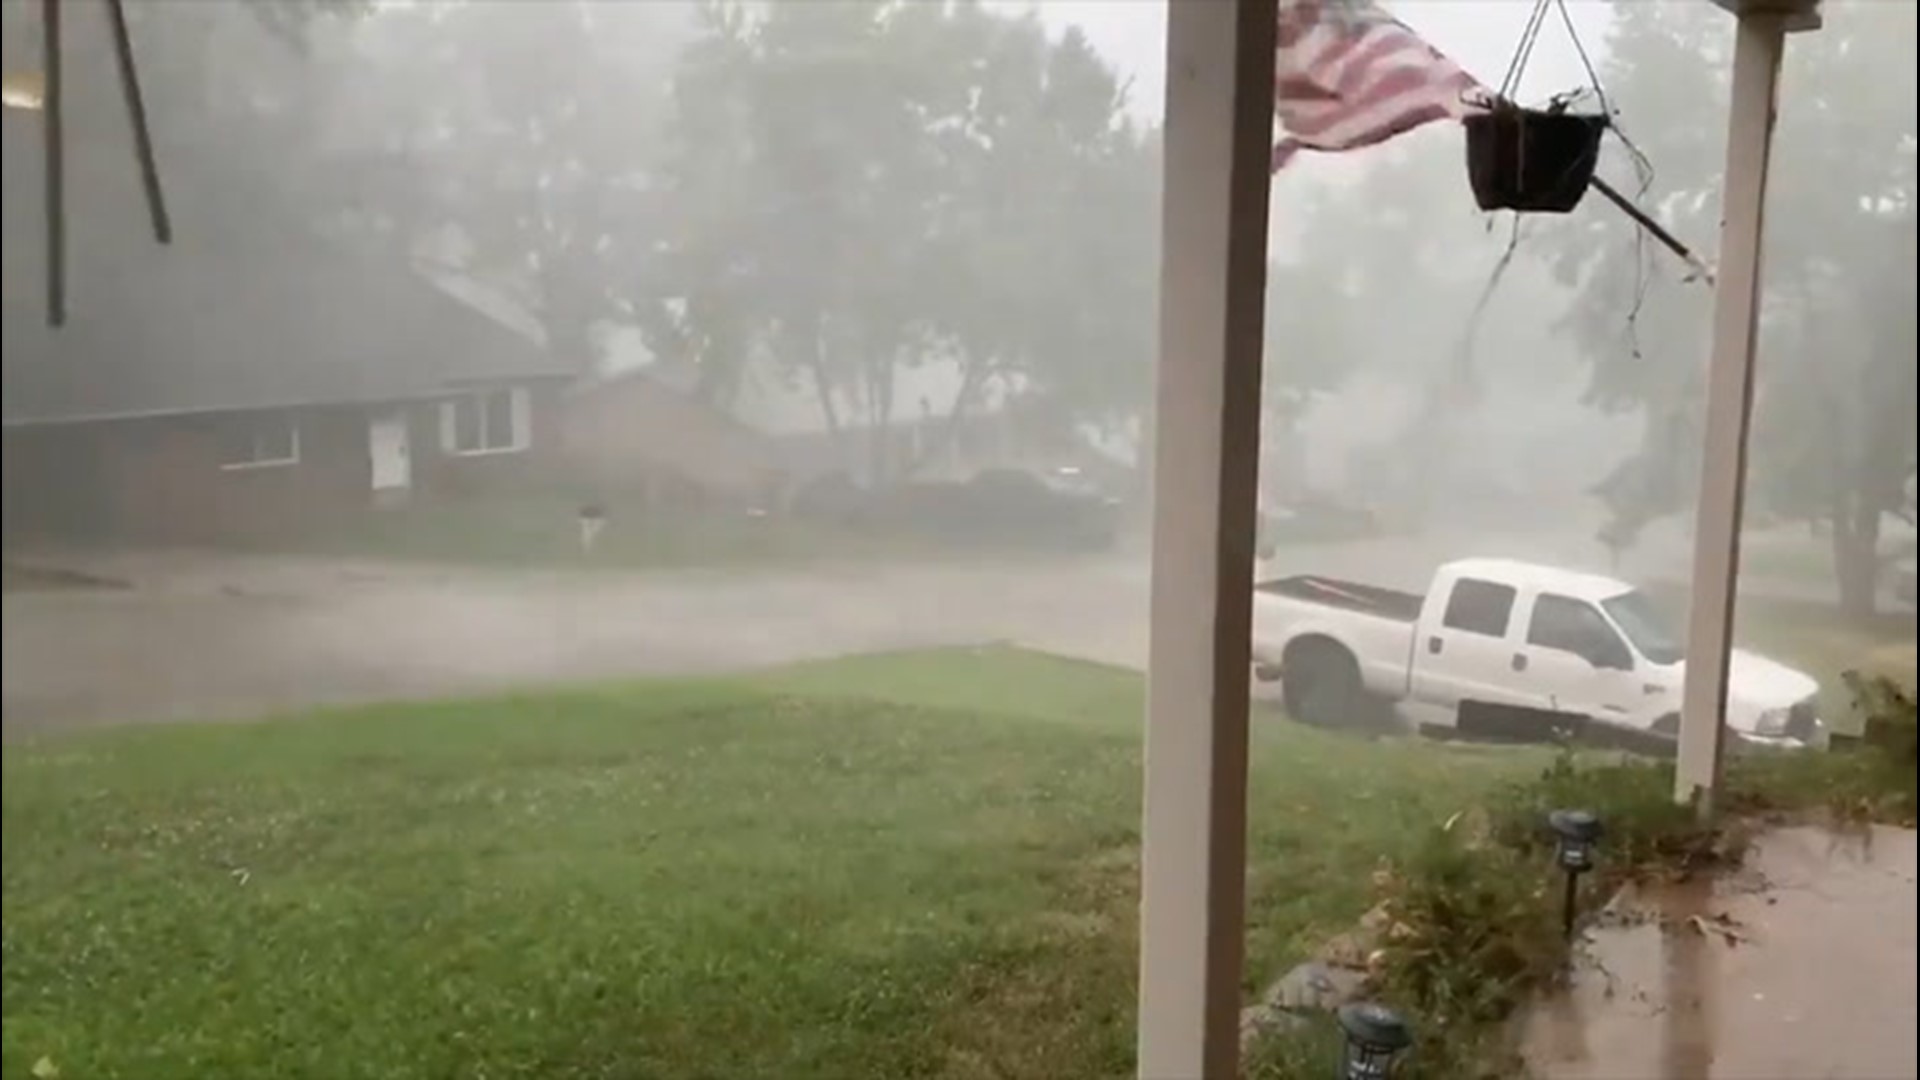 Intense thunderstorms moved through Pevely, Missouri, on July 15 producing strong winds and heavy rain.